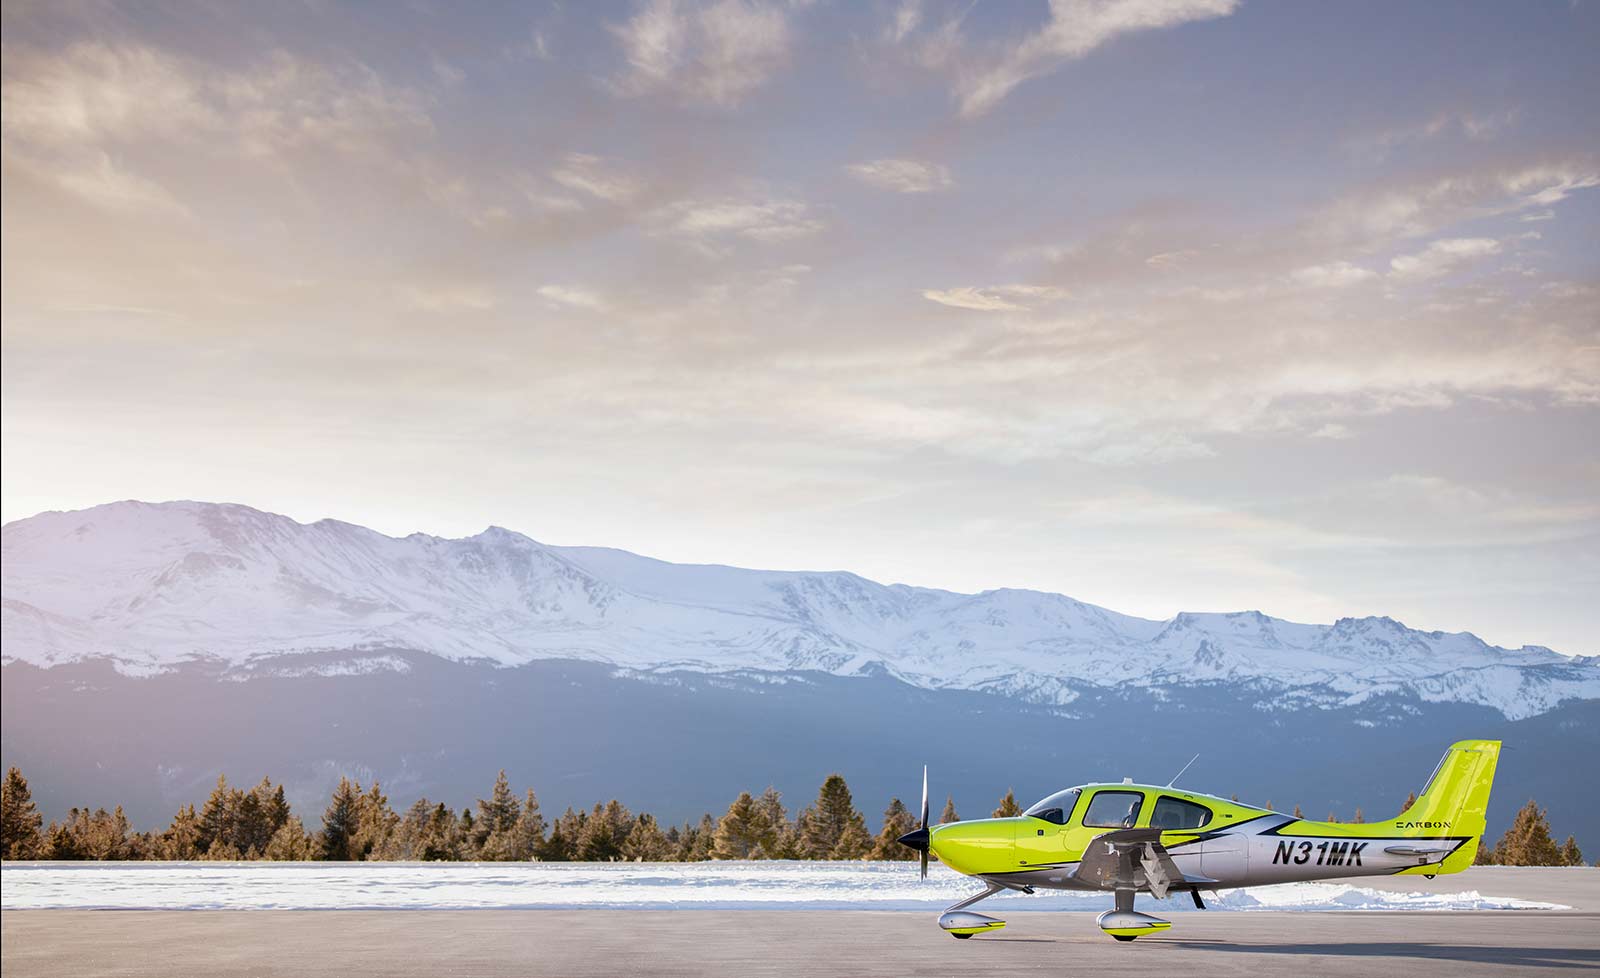 Cirrus SR-22T parked at a mountainous airport